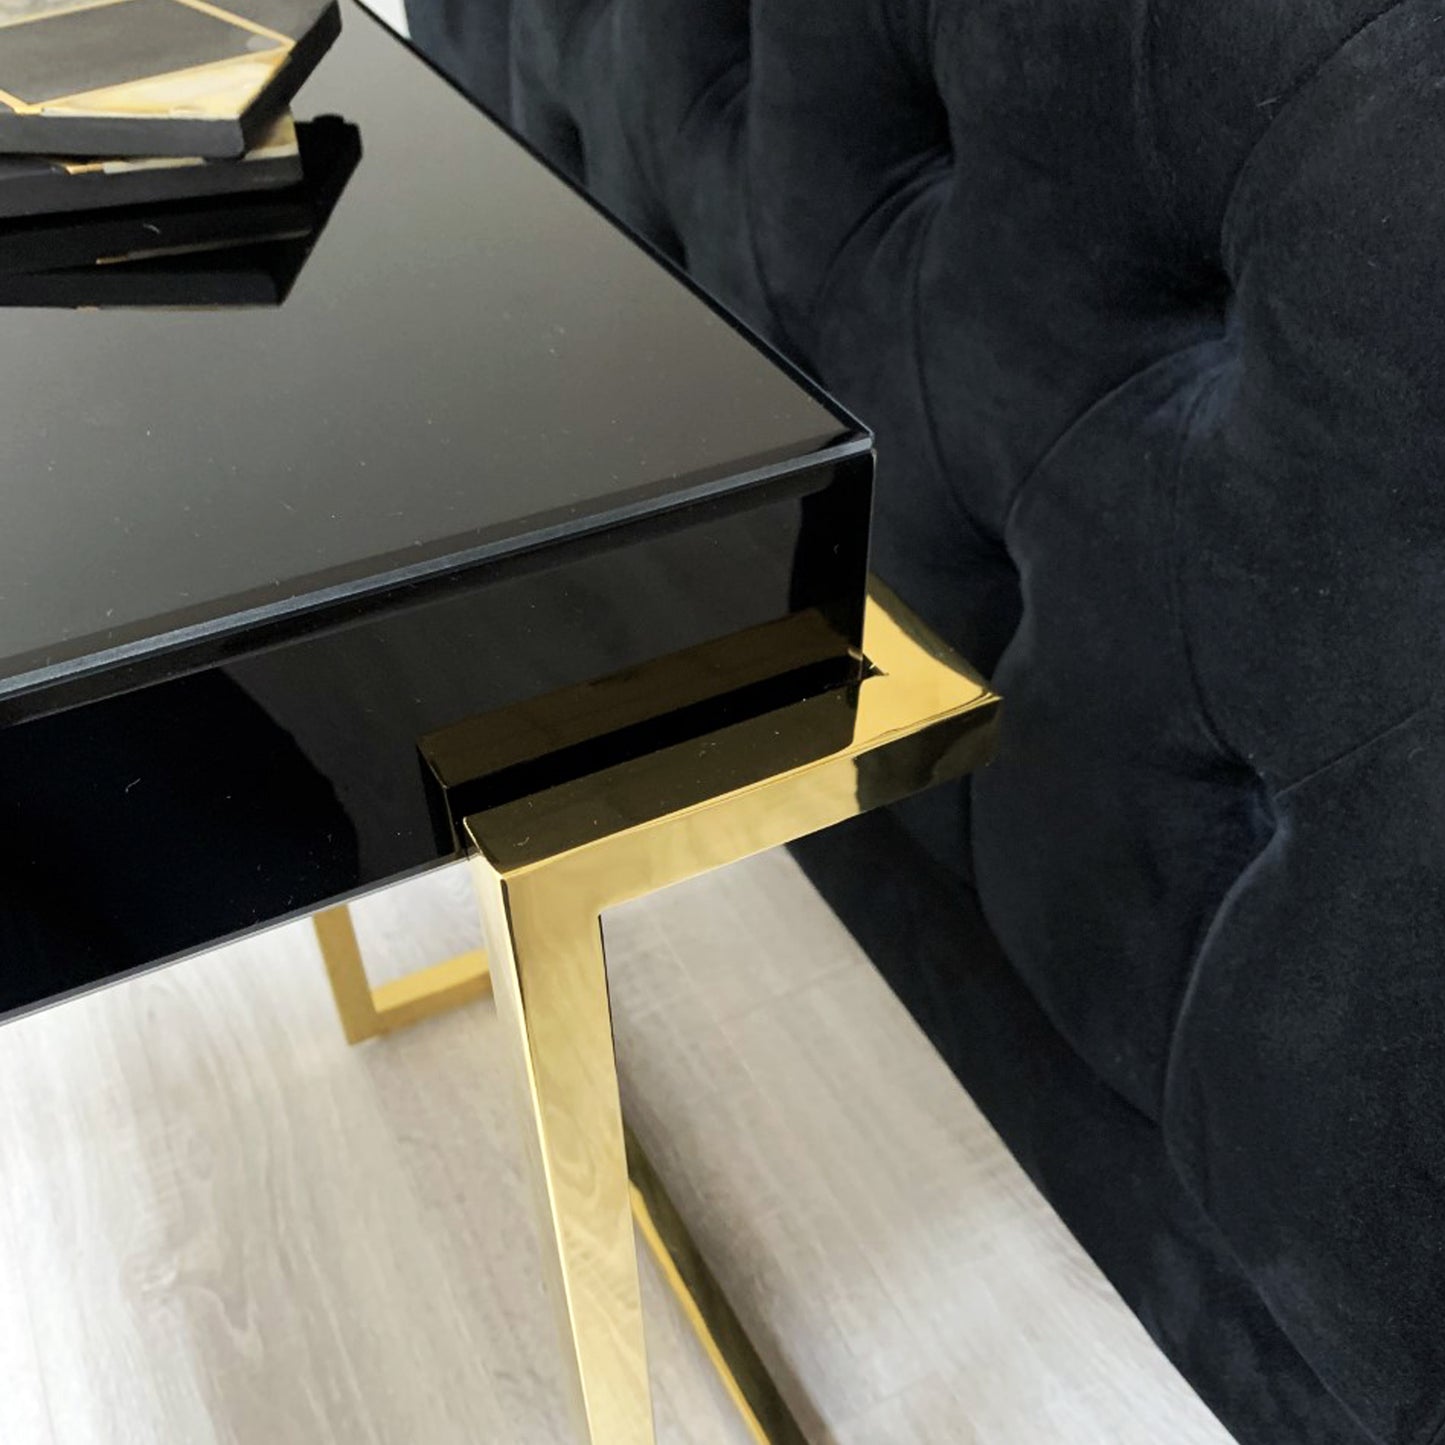 Munro Black and gold mirrored top occasional table